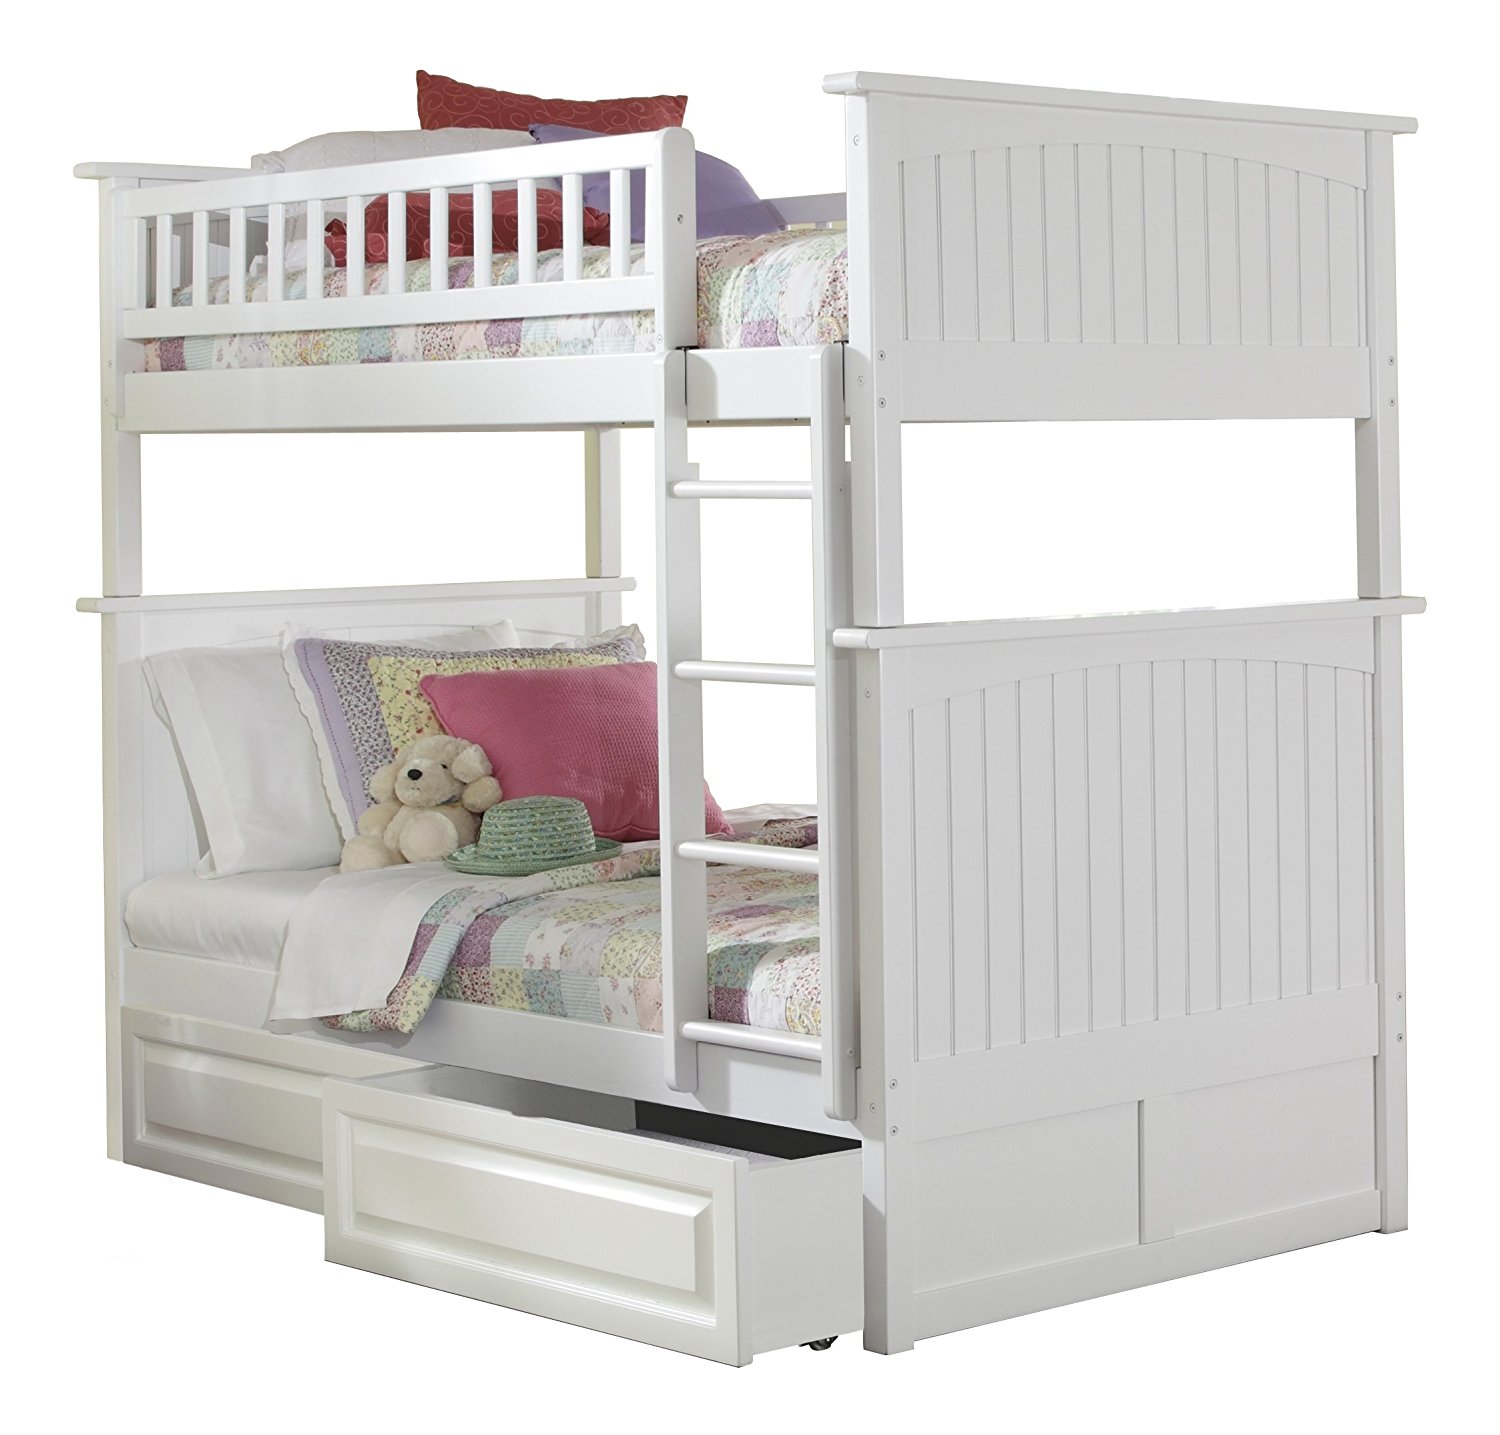 Nantucket Bunk Bed with 2 Raised Panel Bed Drawers, Twin Over Twin, White